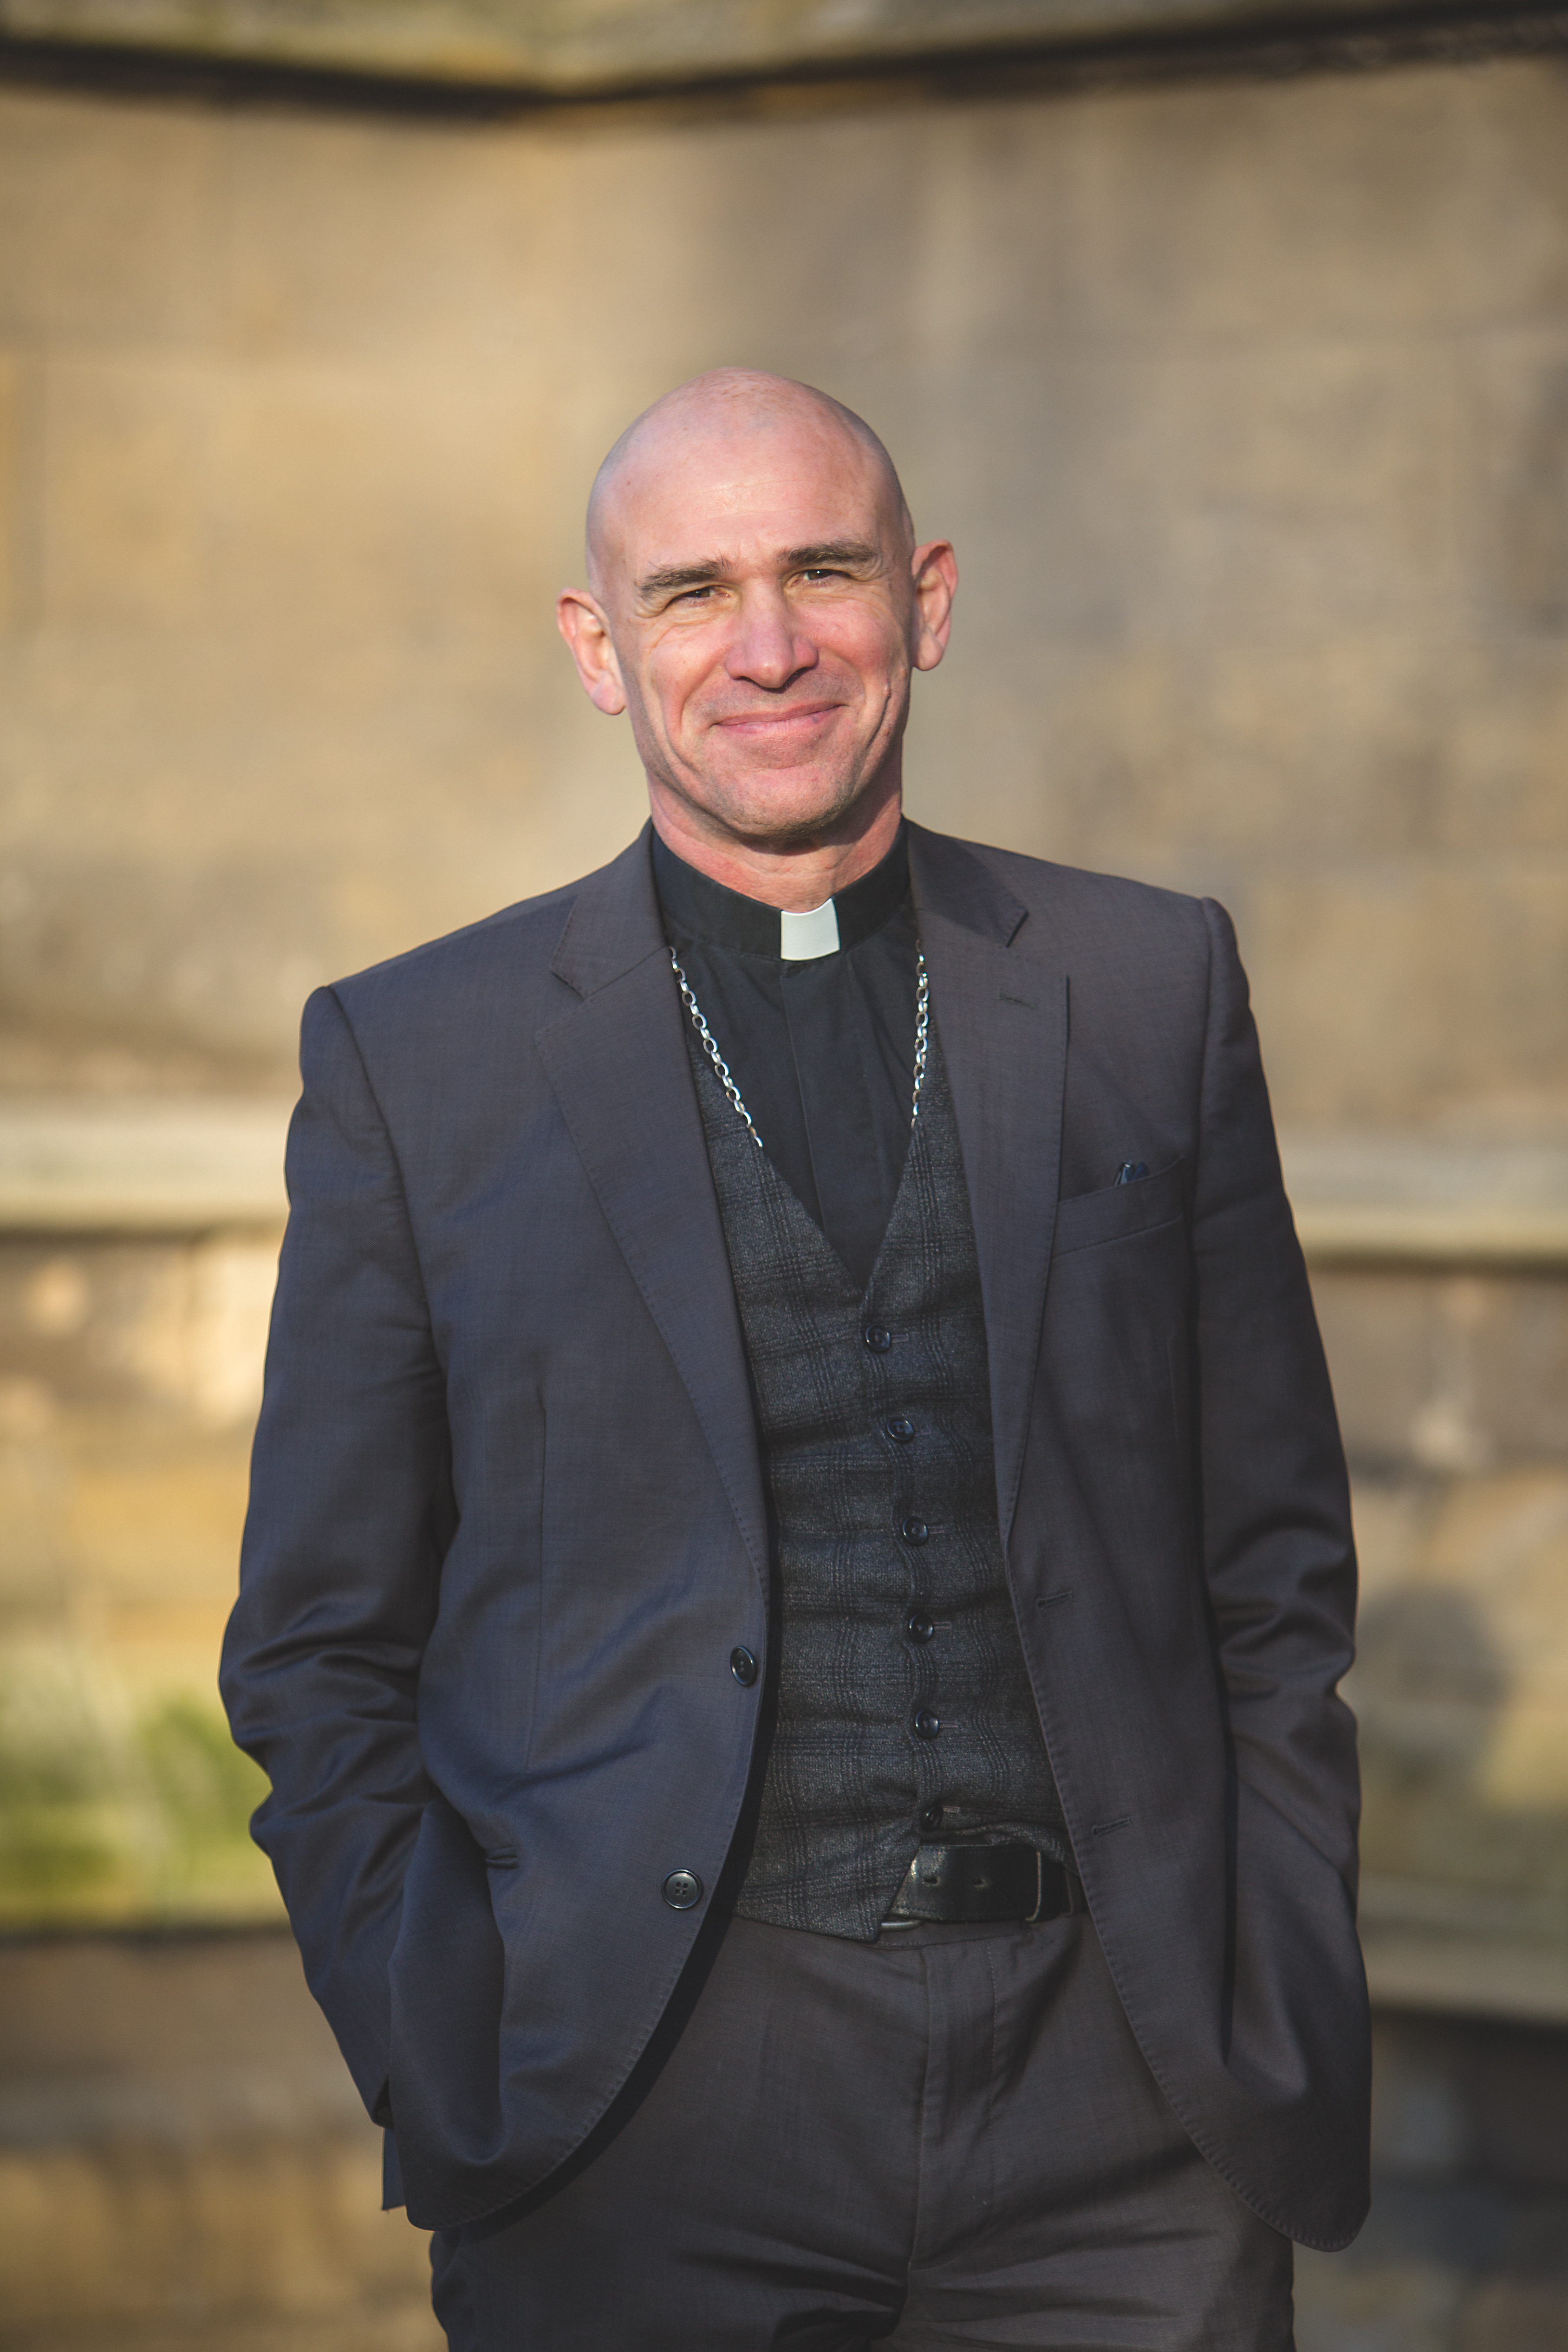 The Rt Revd Dr Pete Wilcox, Bishop of Sheffield is shown standing in a black suit with a clerical collar on 